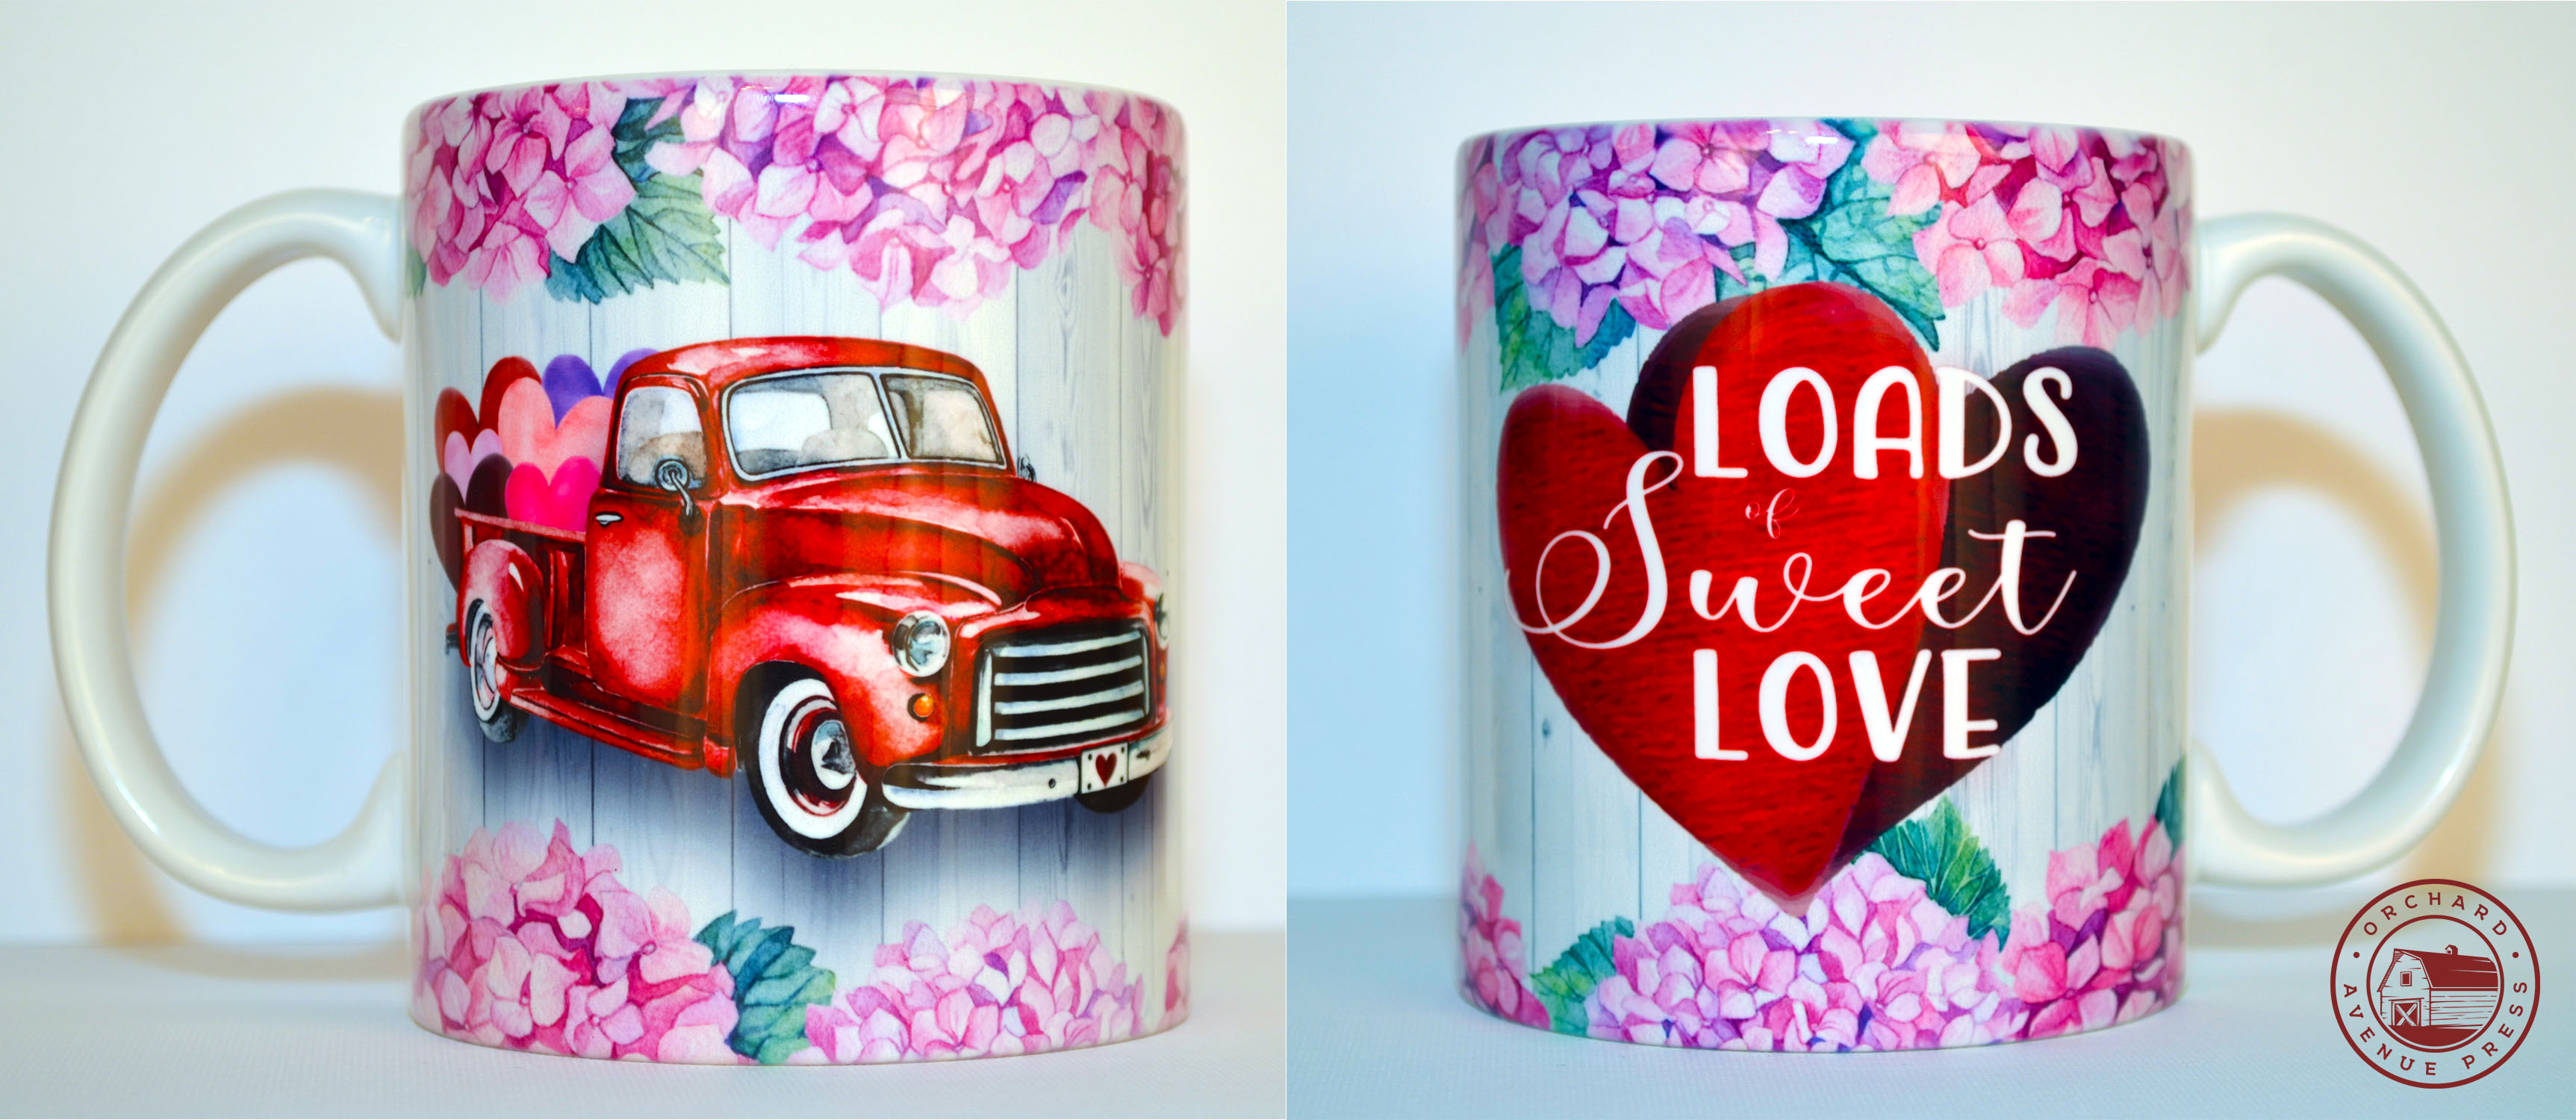 Loads of Sweet Love made with sublimation printing